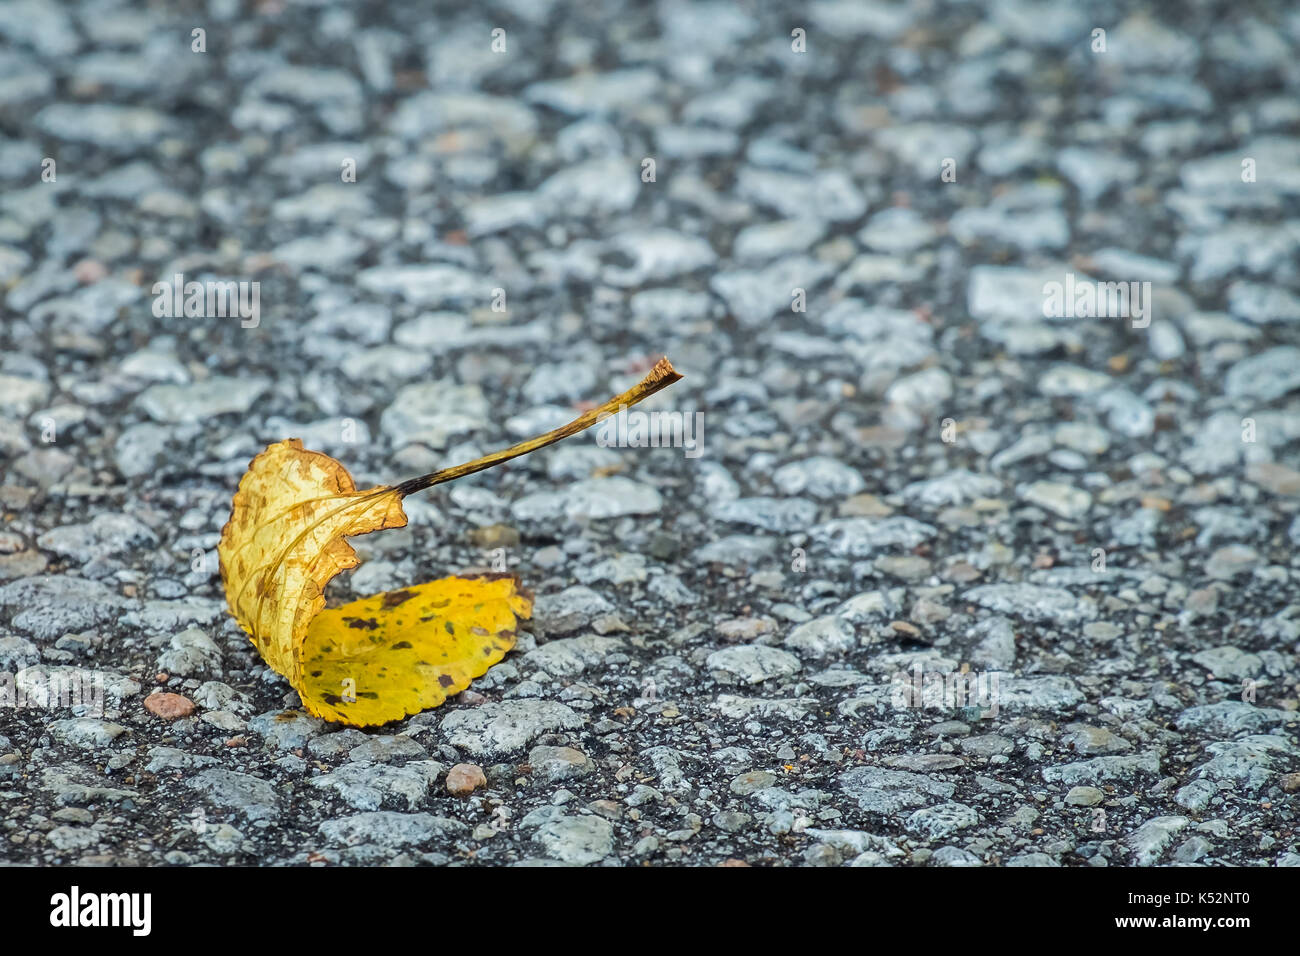 Curled yellow leaf on pebbled asphalt that could be interpretted as stating that autumn has arrived or the end of life. Stock Photo